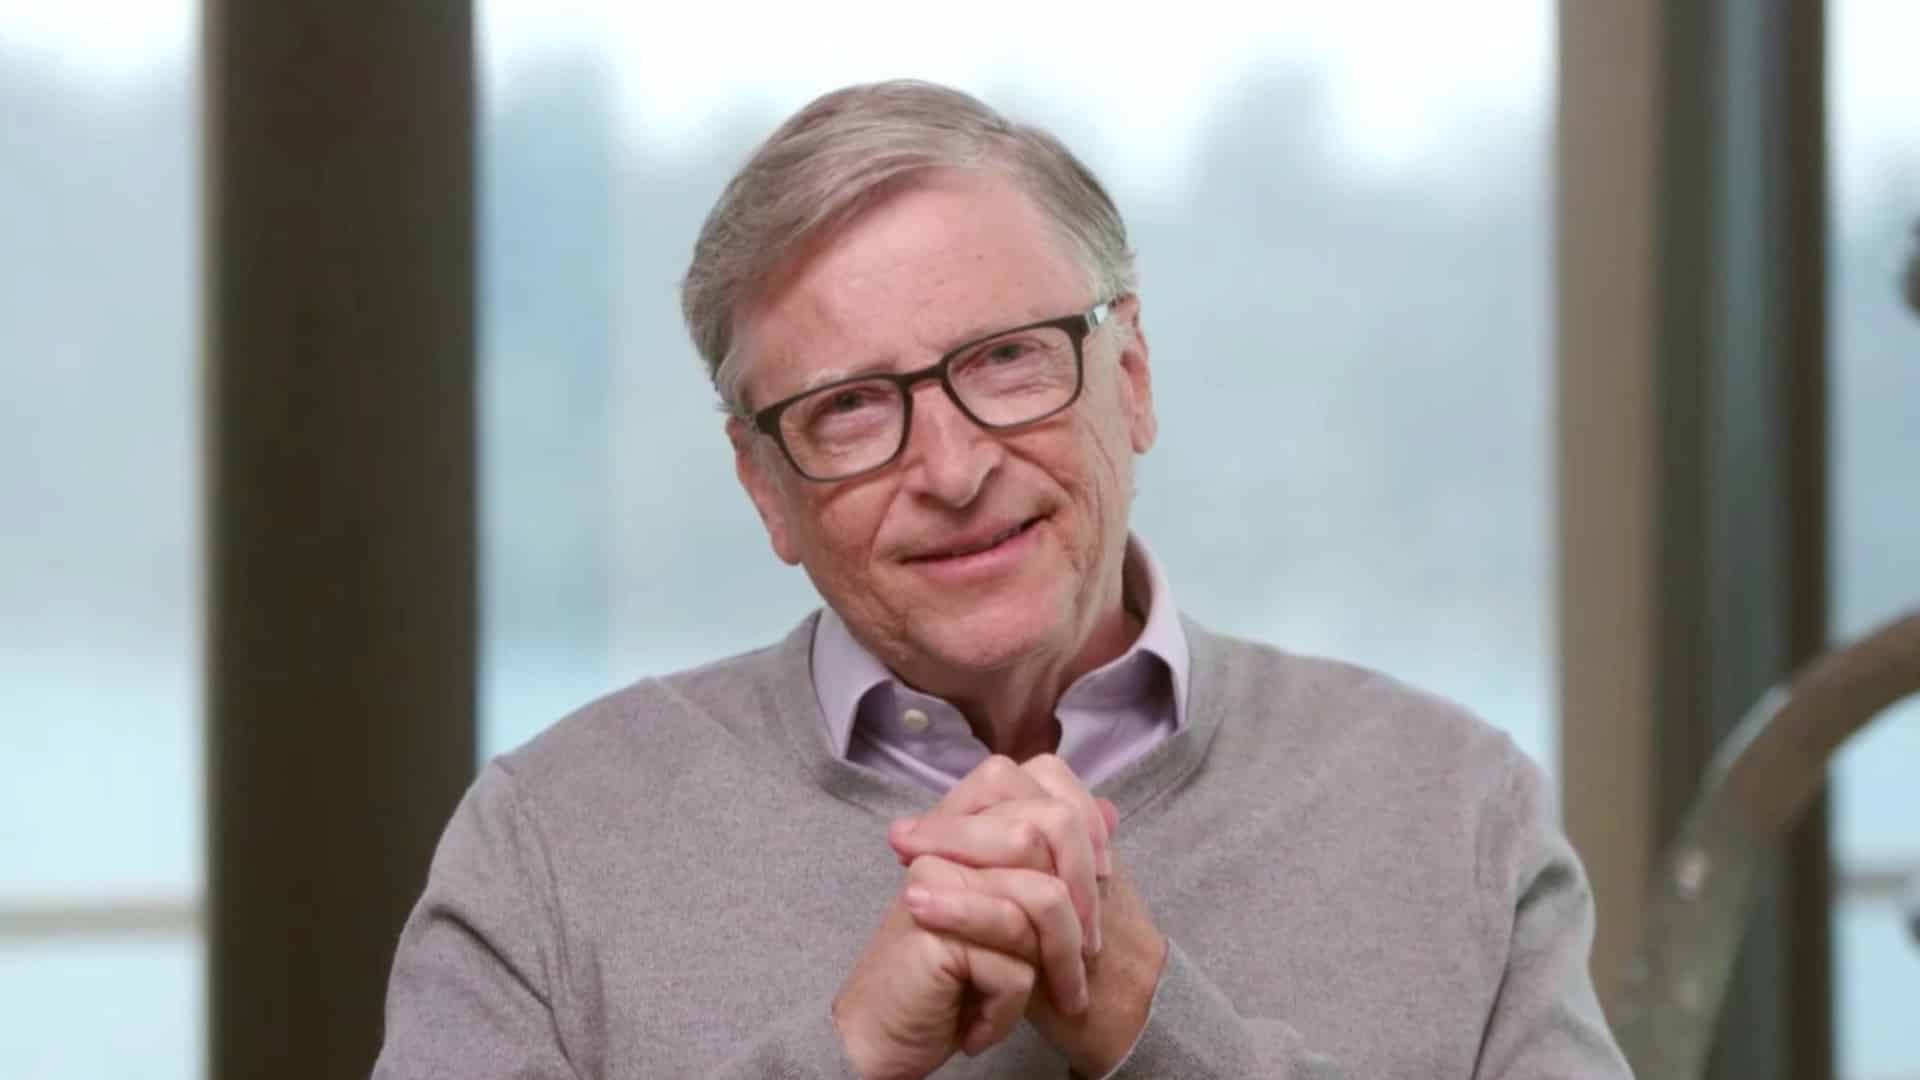 Bill Gates applauds Indian vaccine manufacturers for supplying affordable vaccines across the world